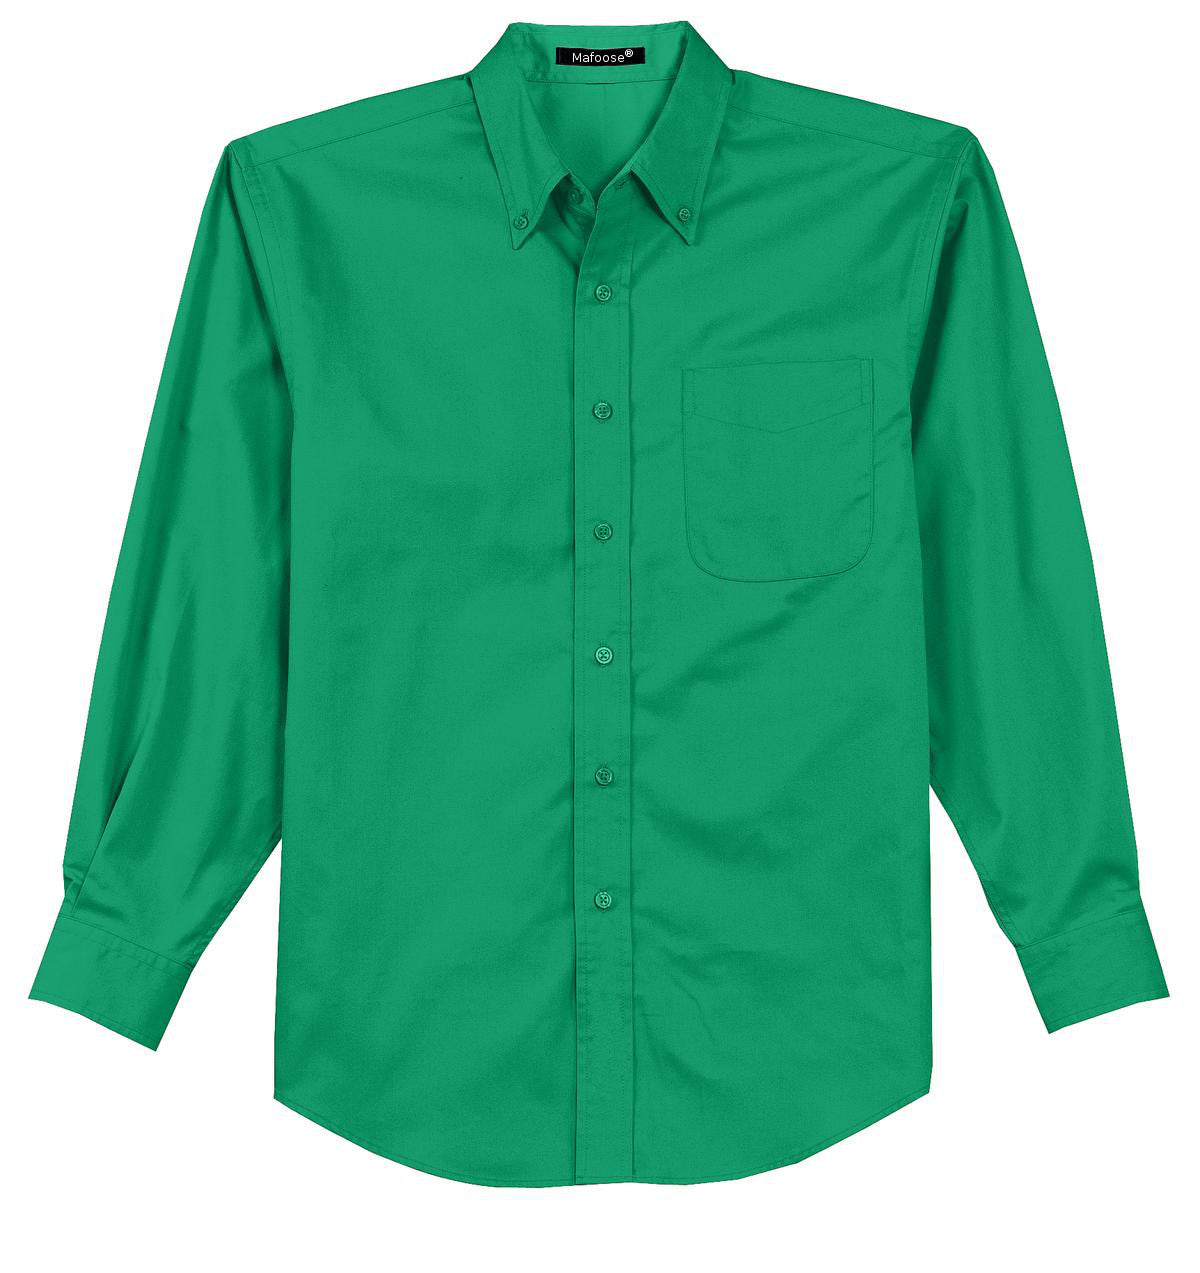 Mafoose Men's Tall Long Sleeve Easy Care Shirt Court Green-Front